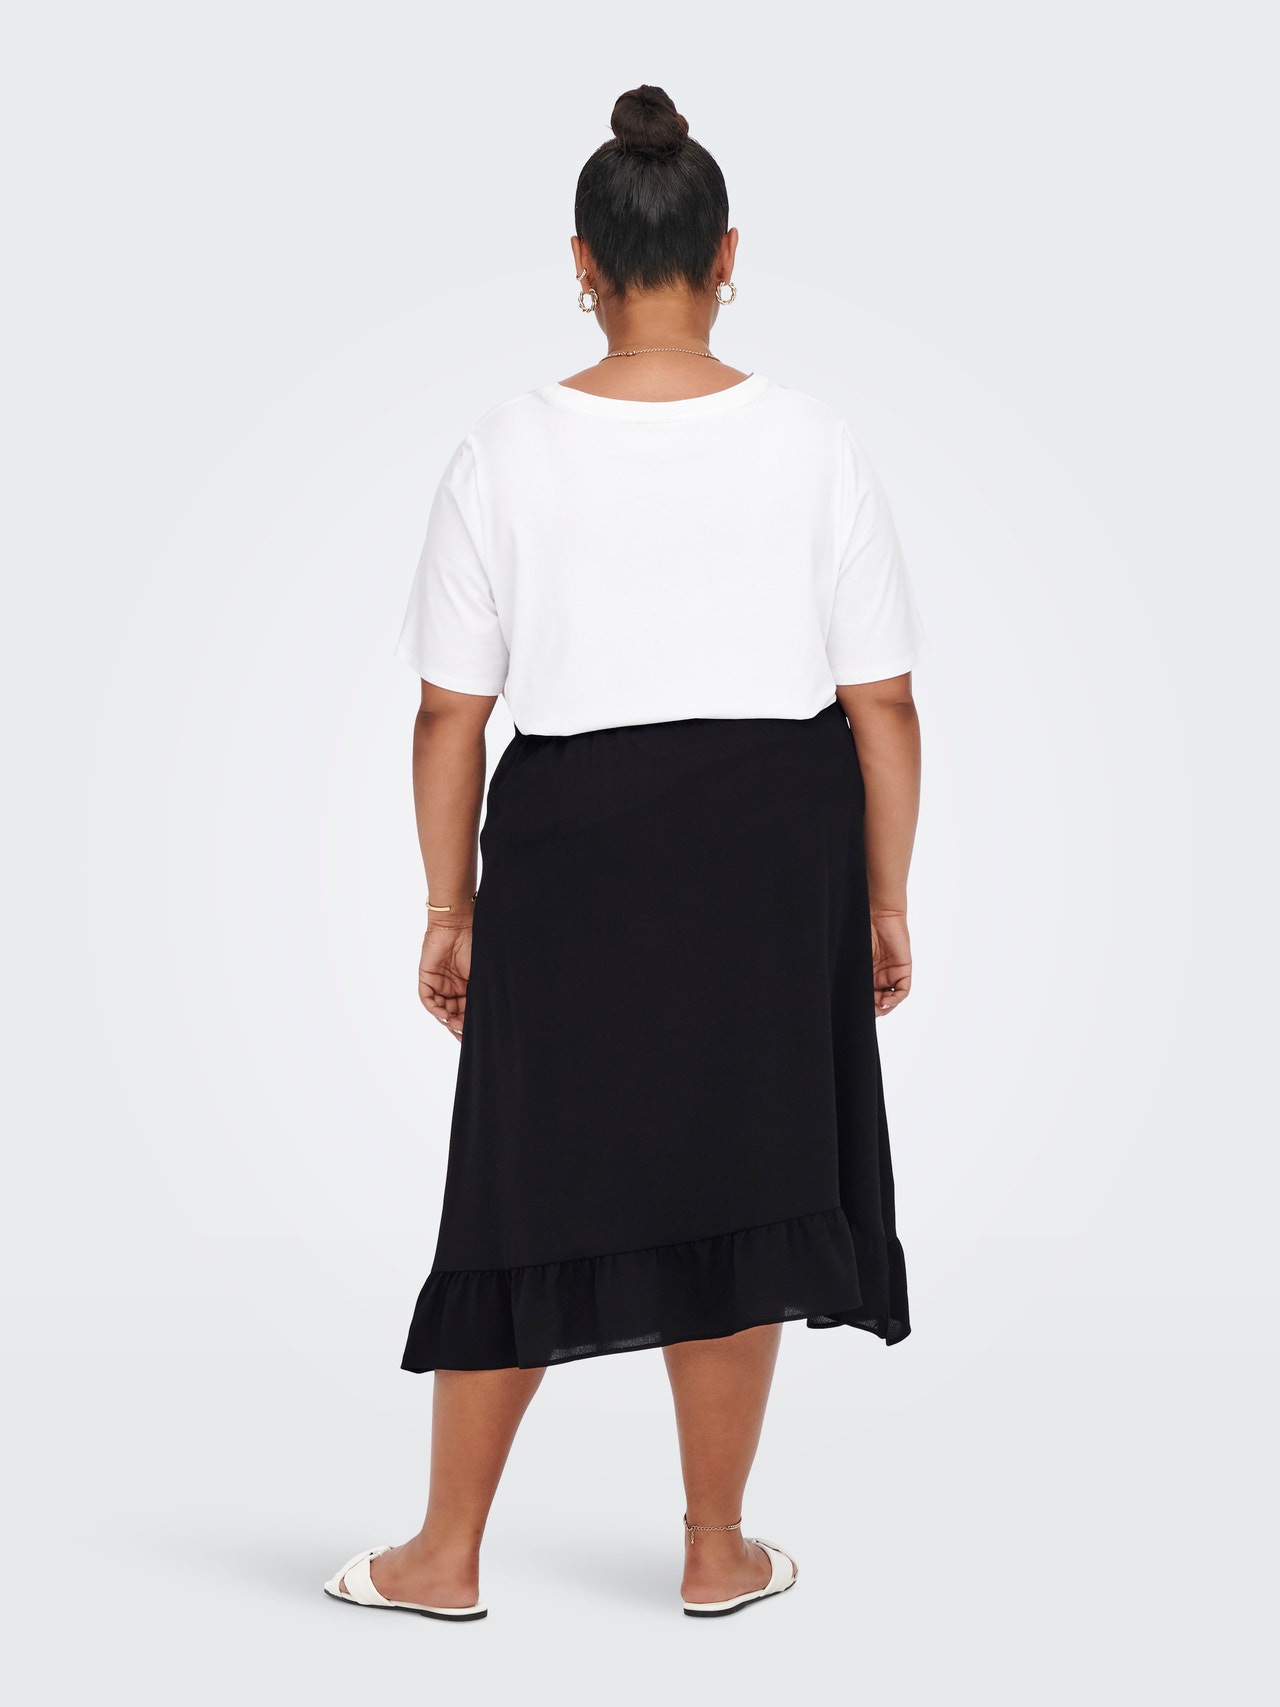 ONLY Curvy - Portefeuille Jupe -Black - 15265902